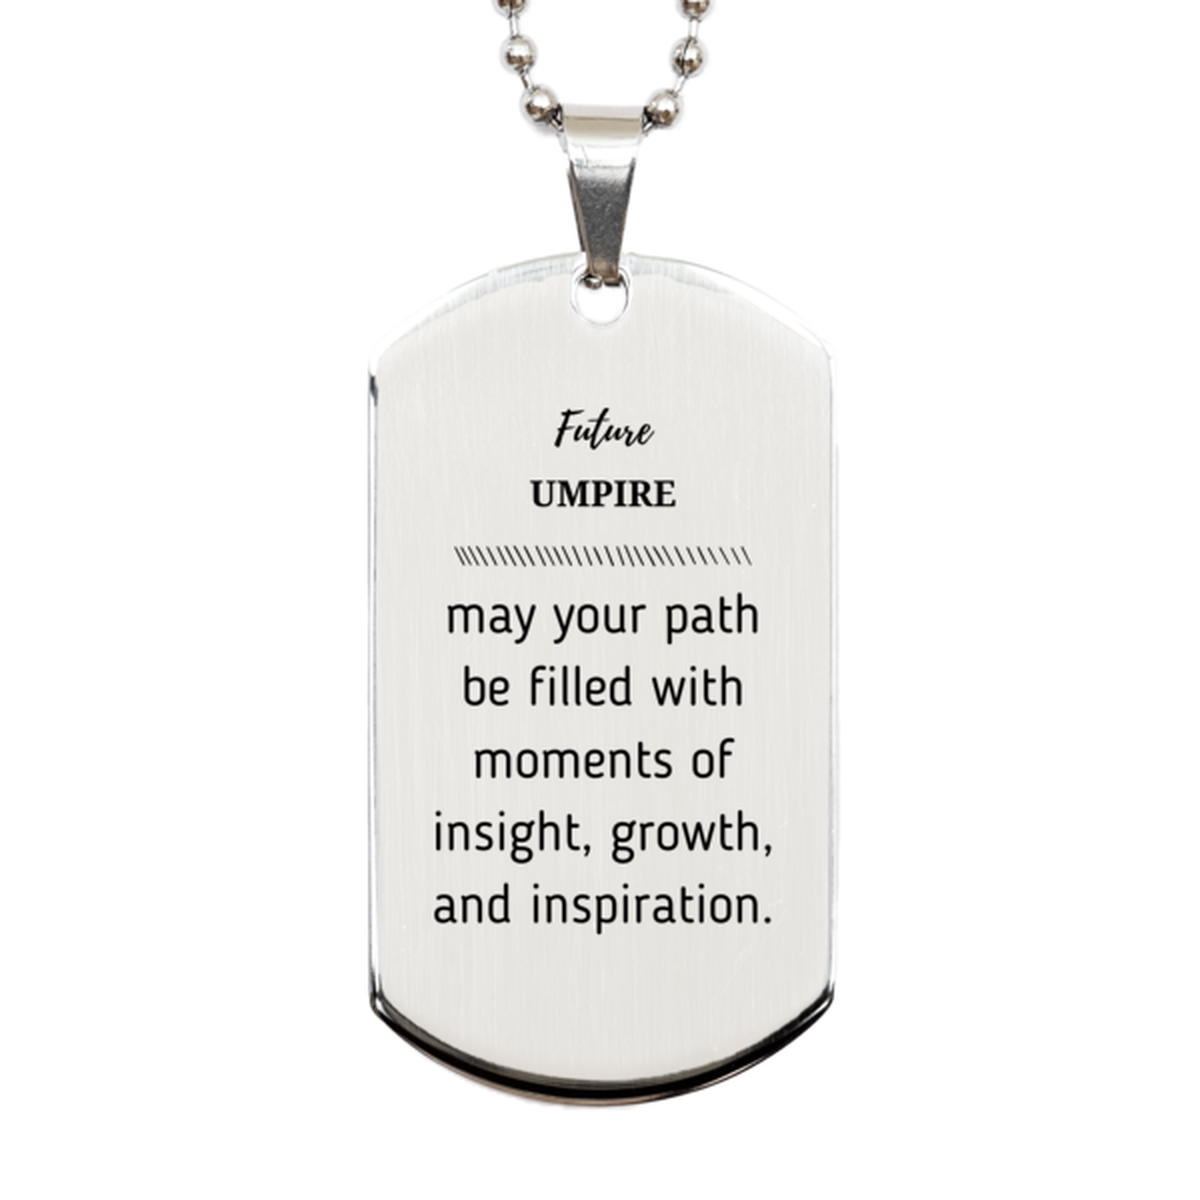 Future Umpire Gifts, May your path be filled with moments of insight, Graduation Gifts for New Umpire, Christmas Unique Silver Dog Tag For Men, Women, Friends